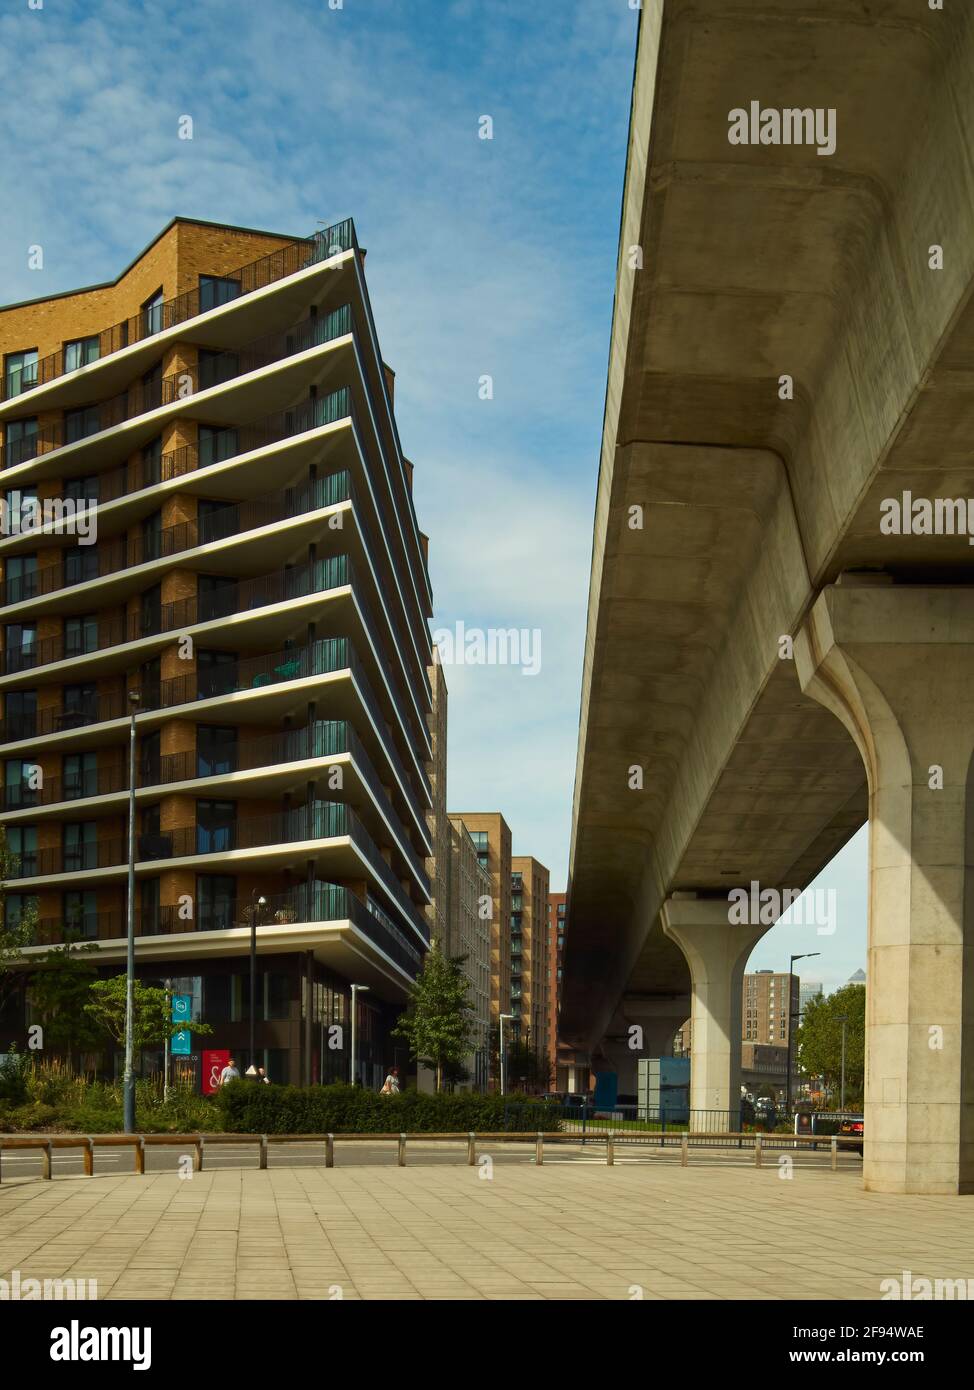 London Aug 2019 - Aspirational residential properties near the Royal Victoria Dock, part of a gentrification and redevelopment project. Stock Photo